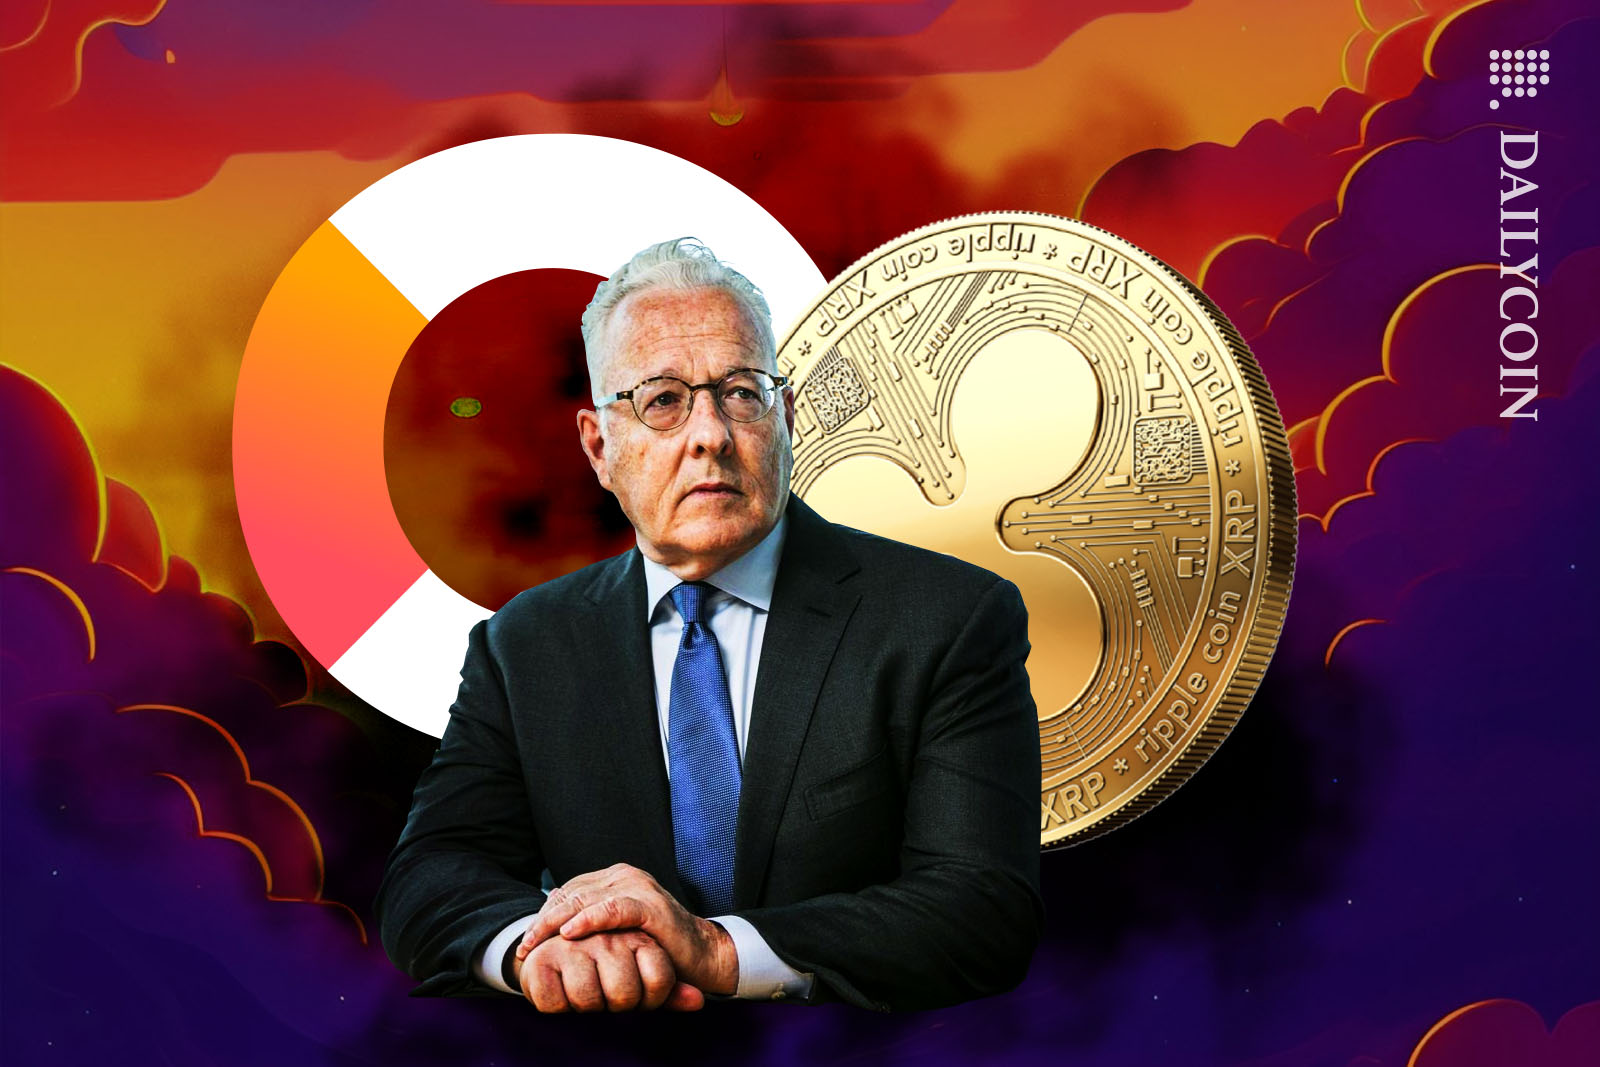 A composition of Bill Hinman, A Ripple coin and a Metaco logo set infront of a purple cartoonish sky.